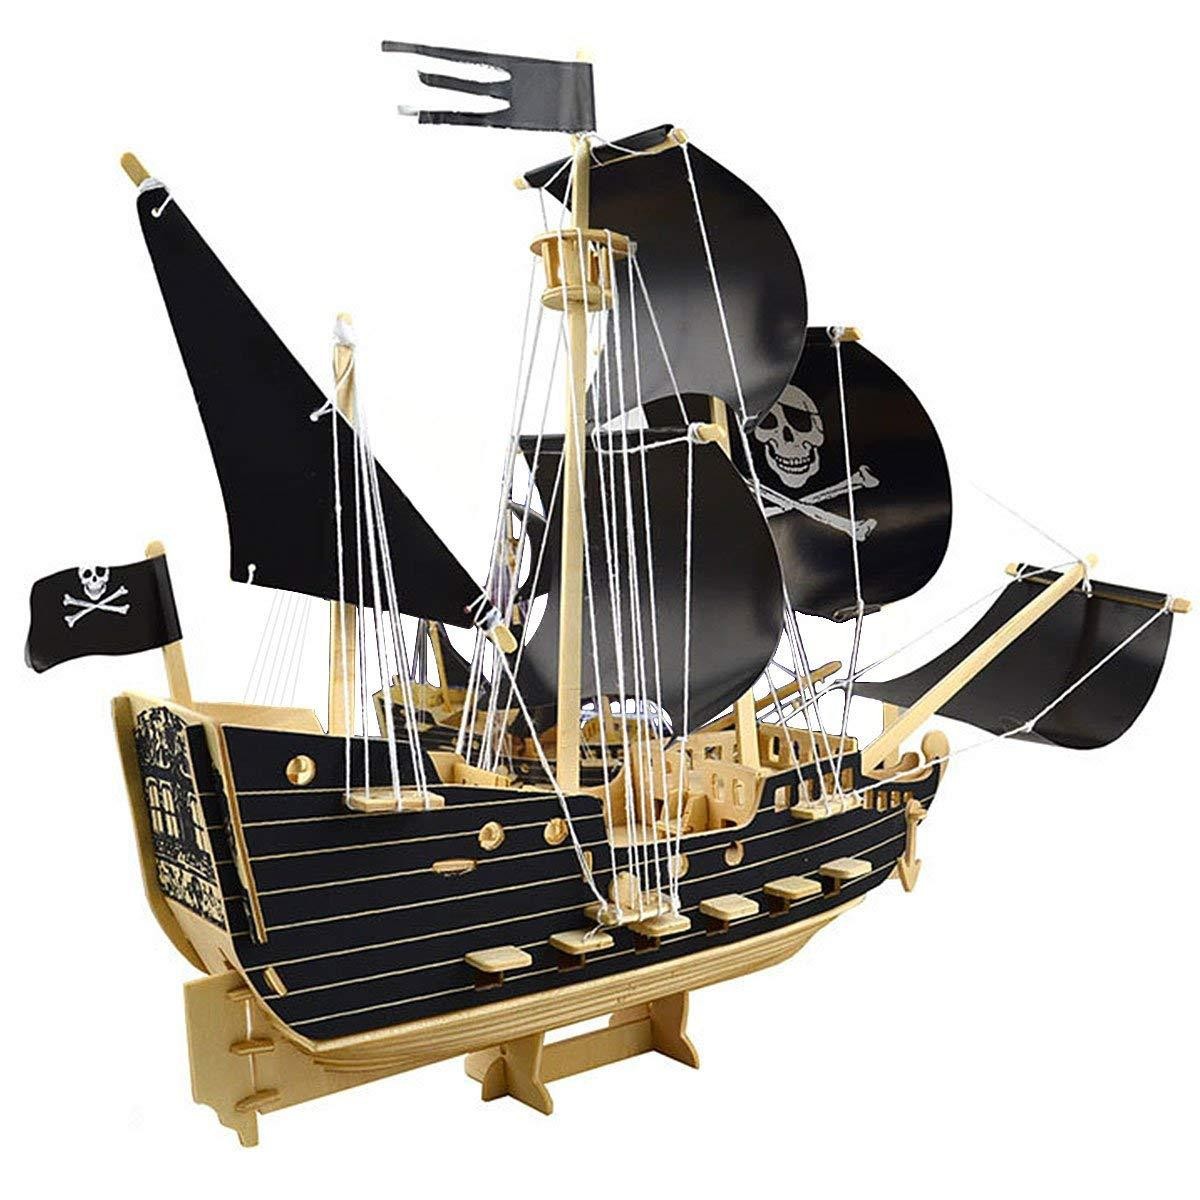 Pirate Ship Papercraft Pirate Ship Wooden Models 3d Wooden Sailing Ships Models Puzzle